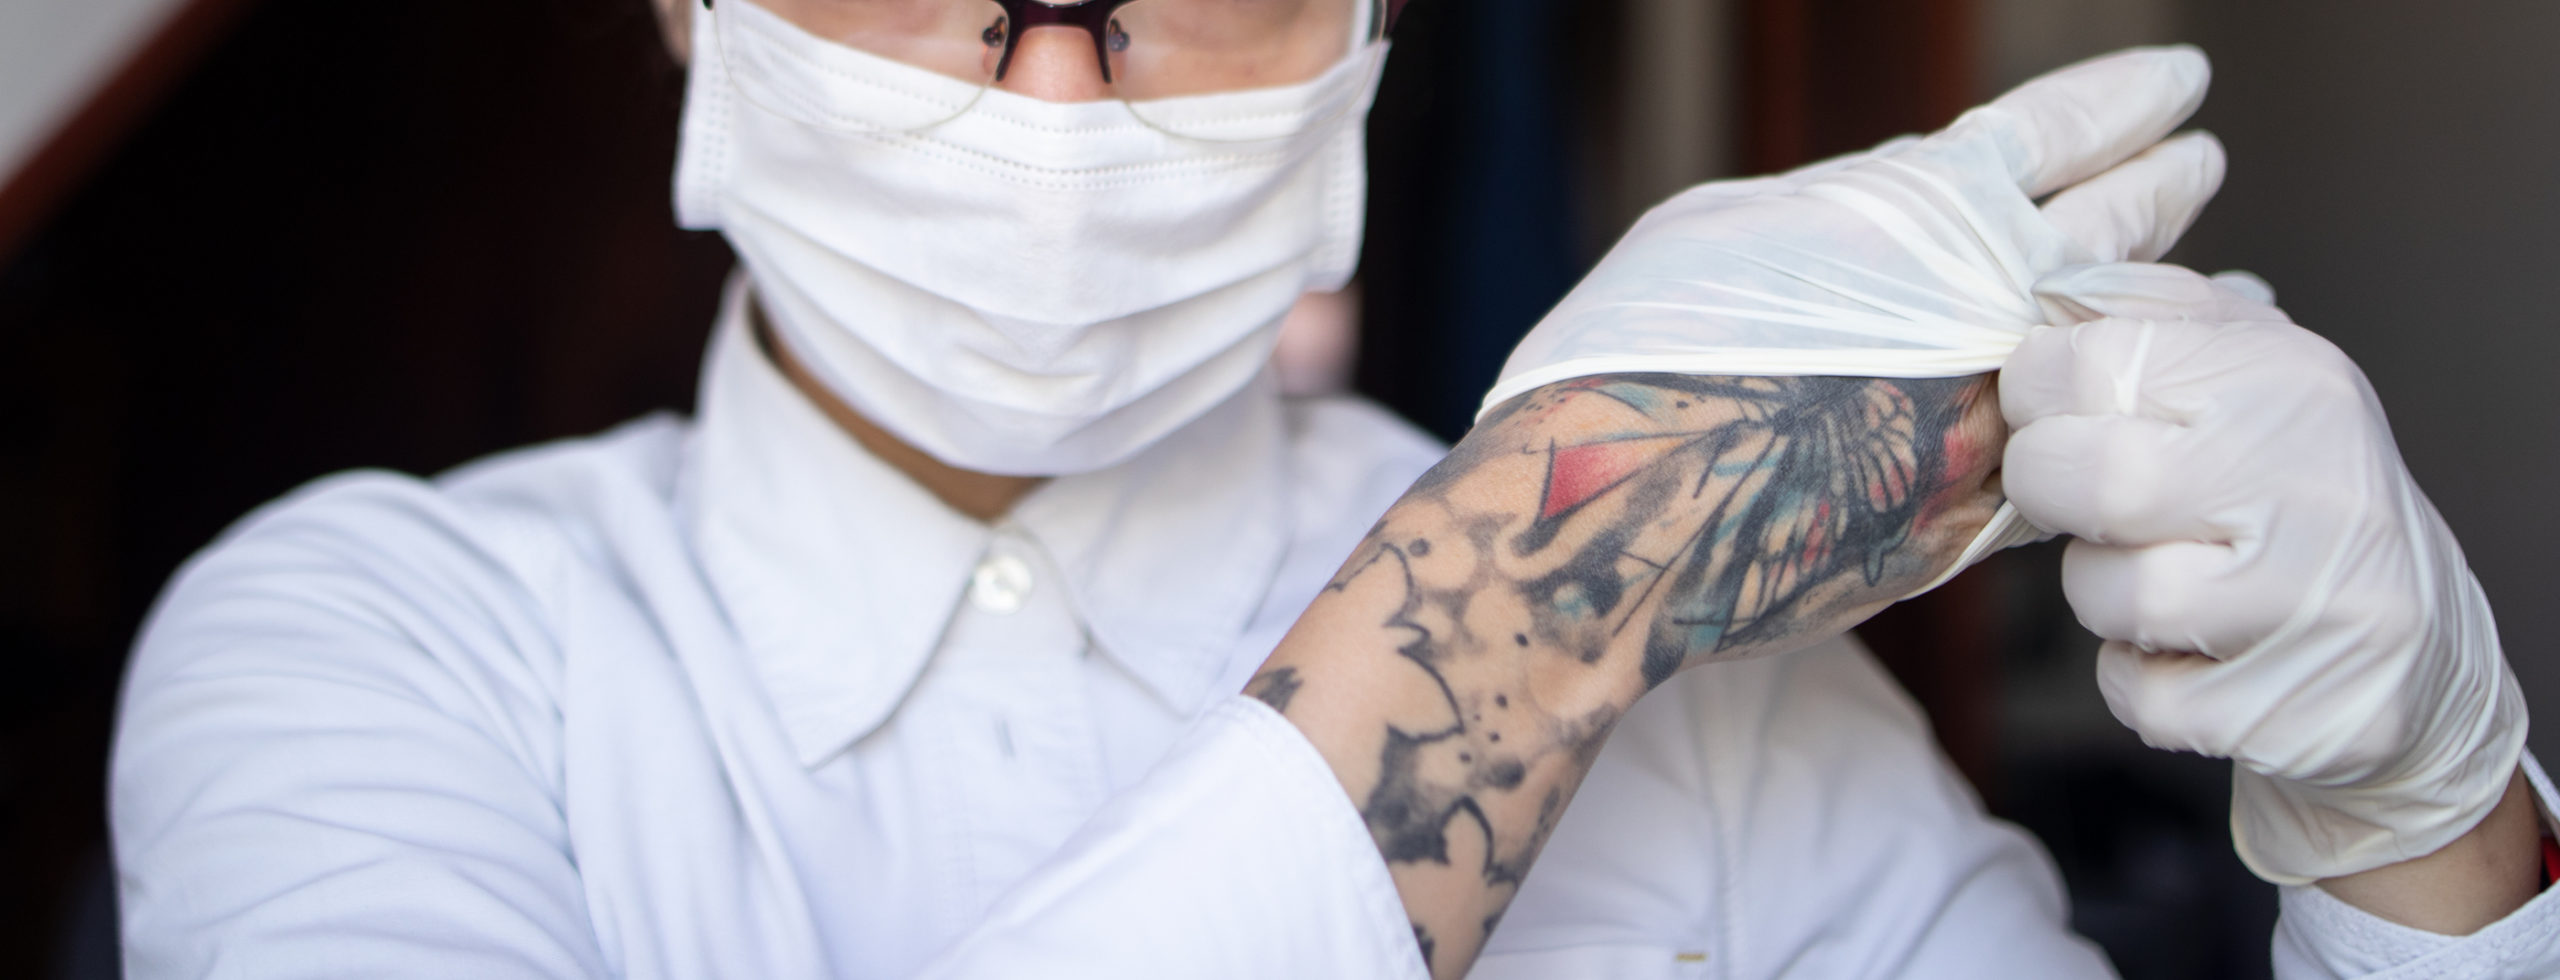 Can Nurses Have Tattoos and Nose Piercings? | Incredible Health